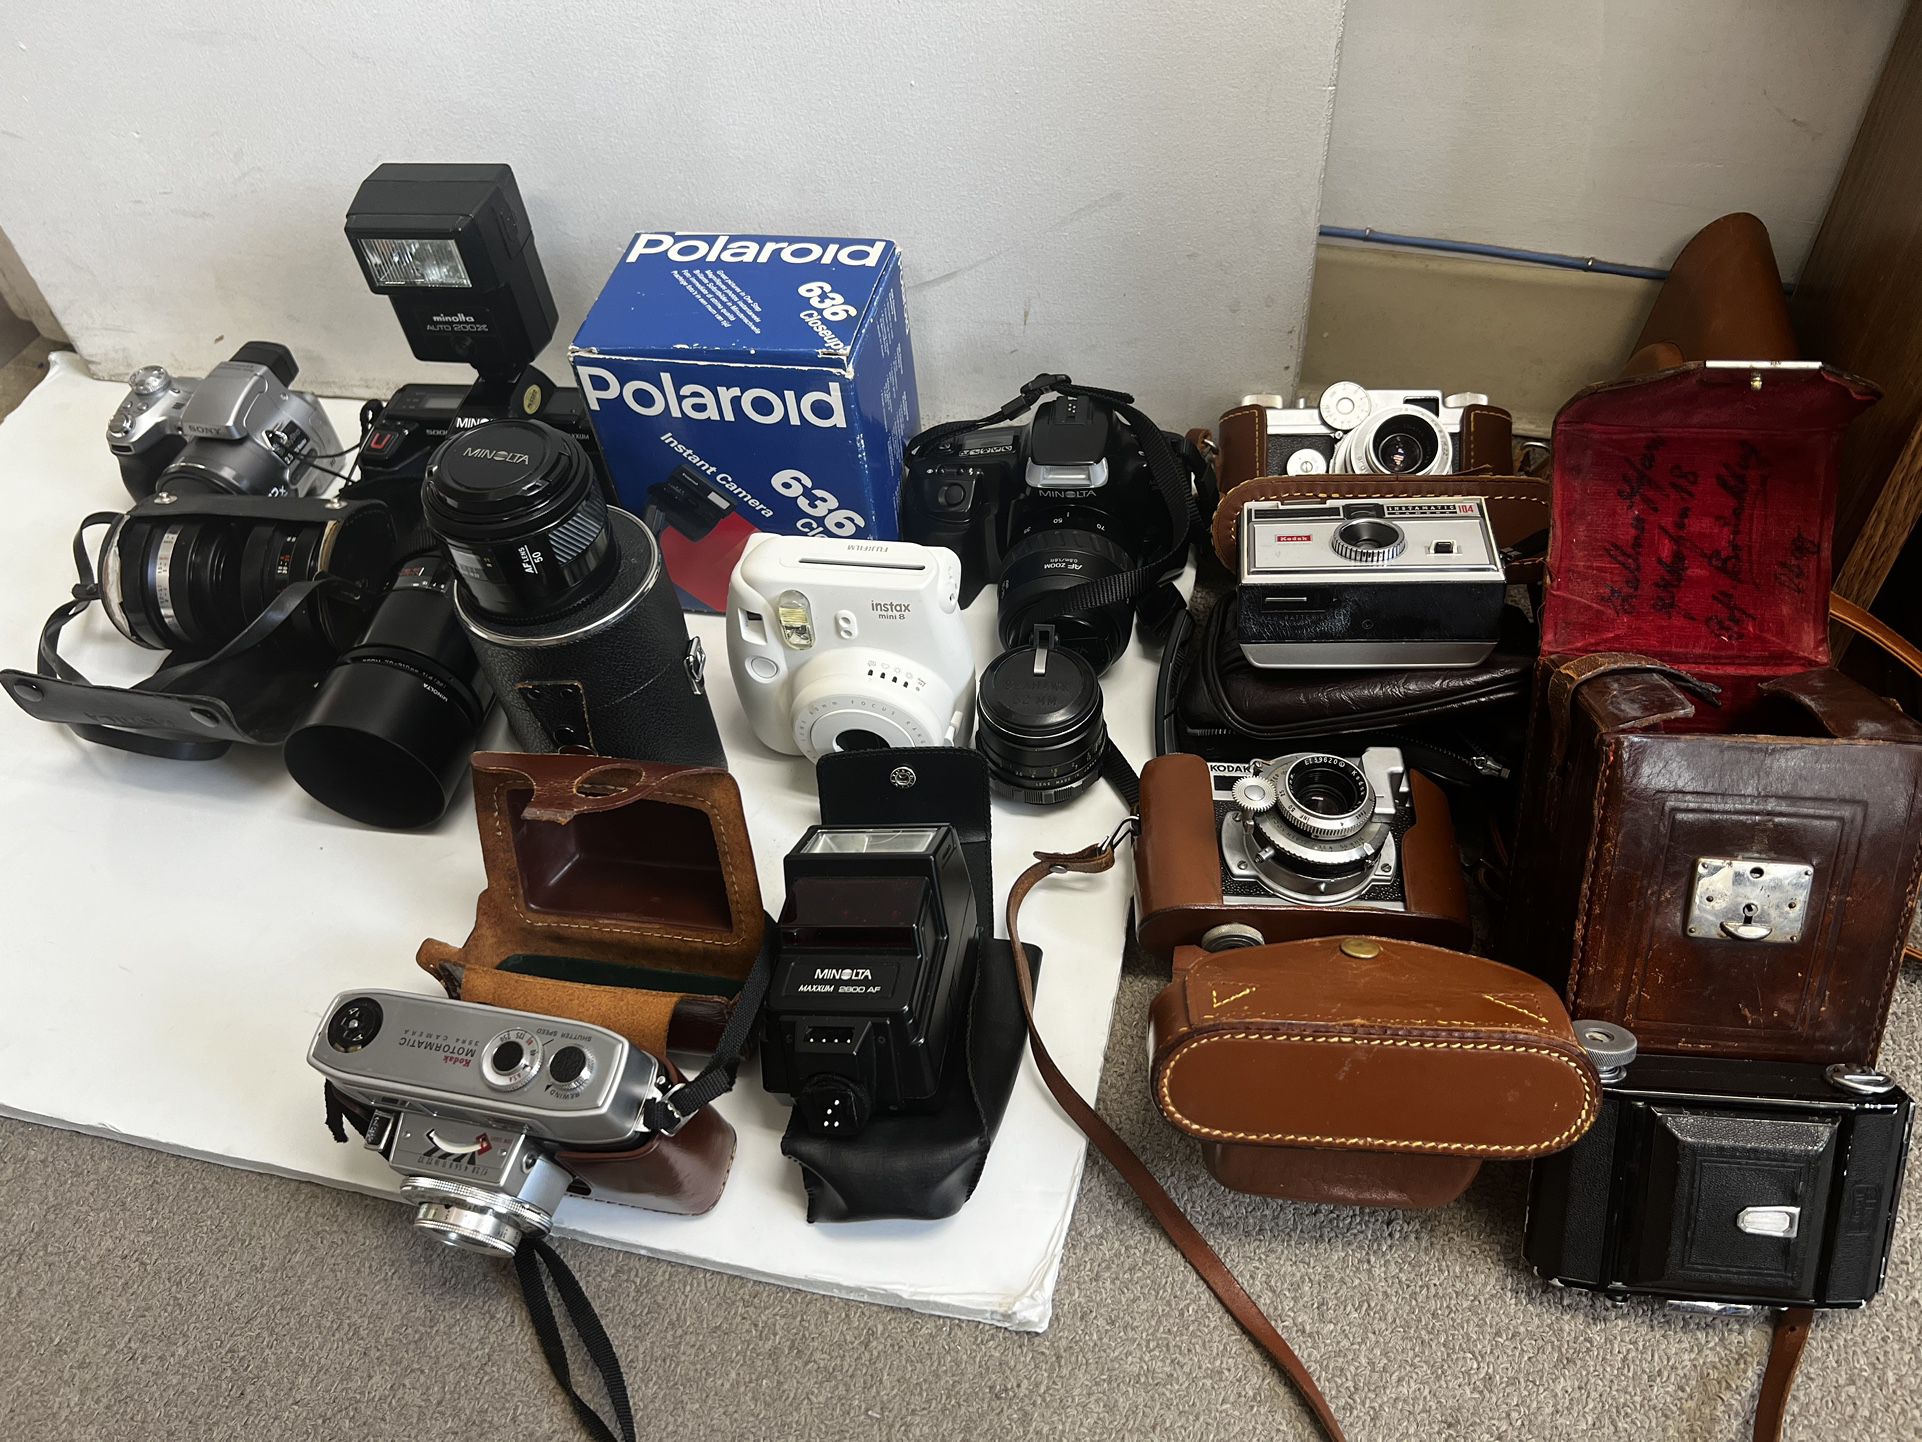 Huge collection of vintage and antique cameras and lenses